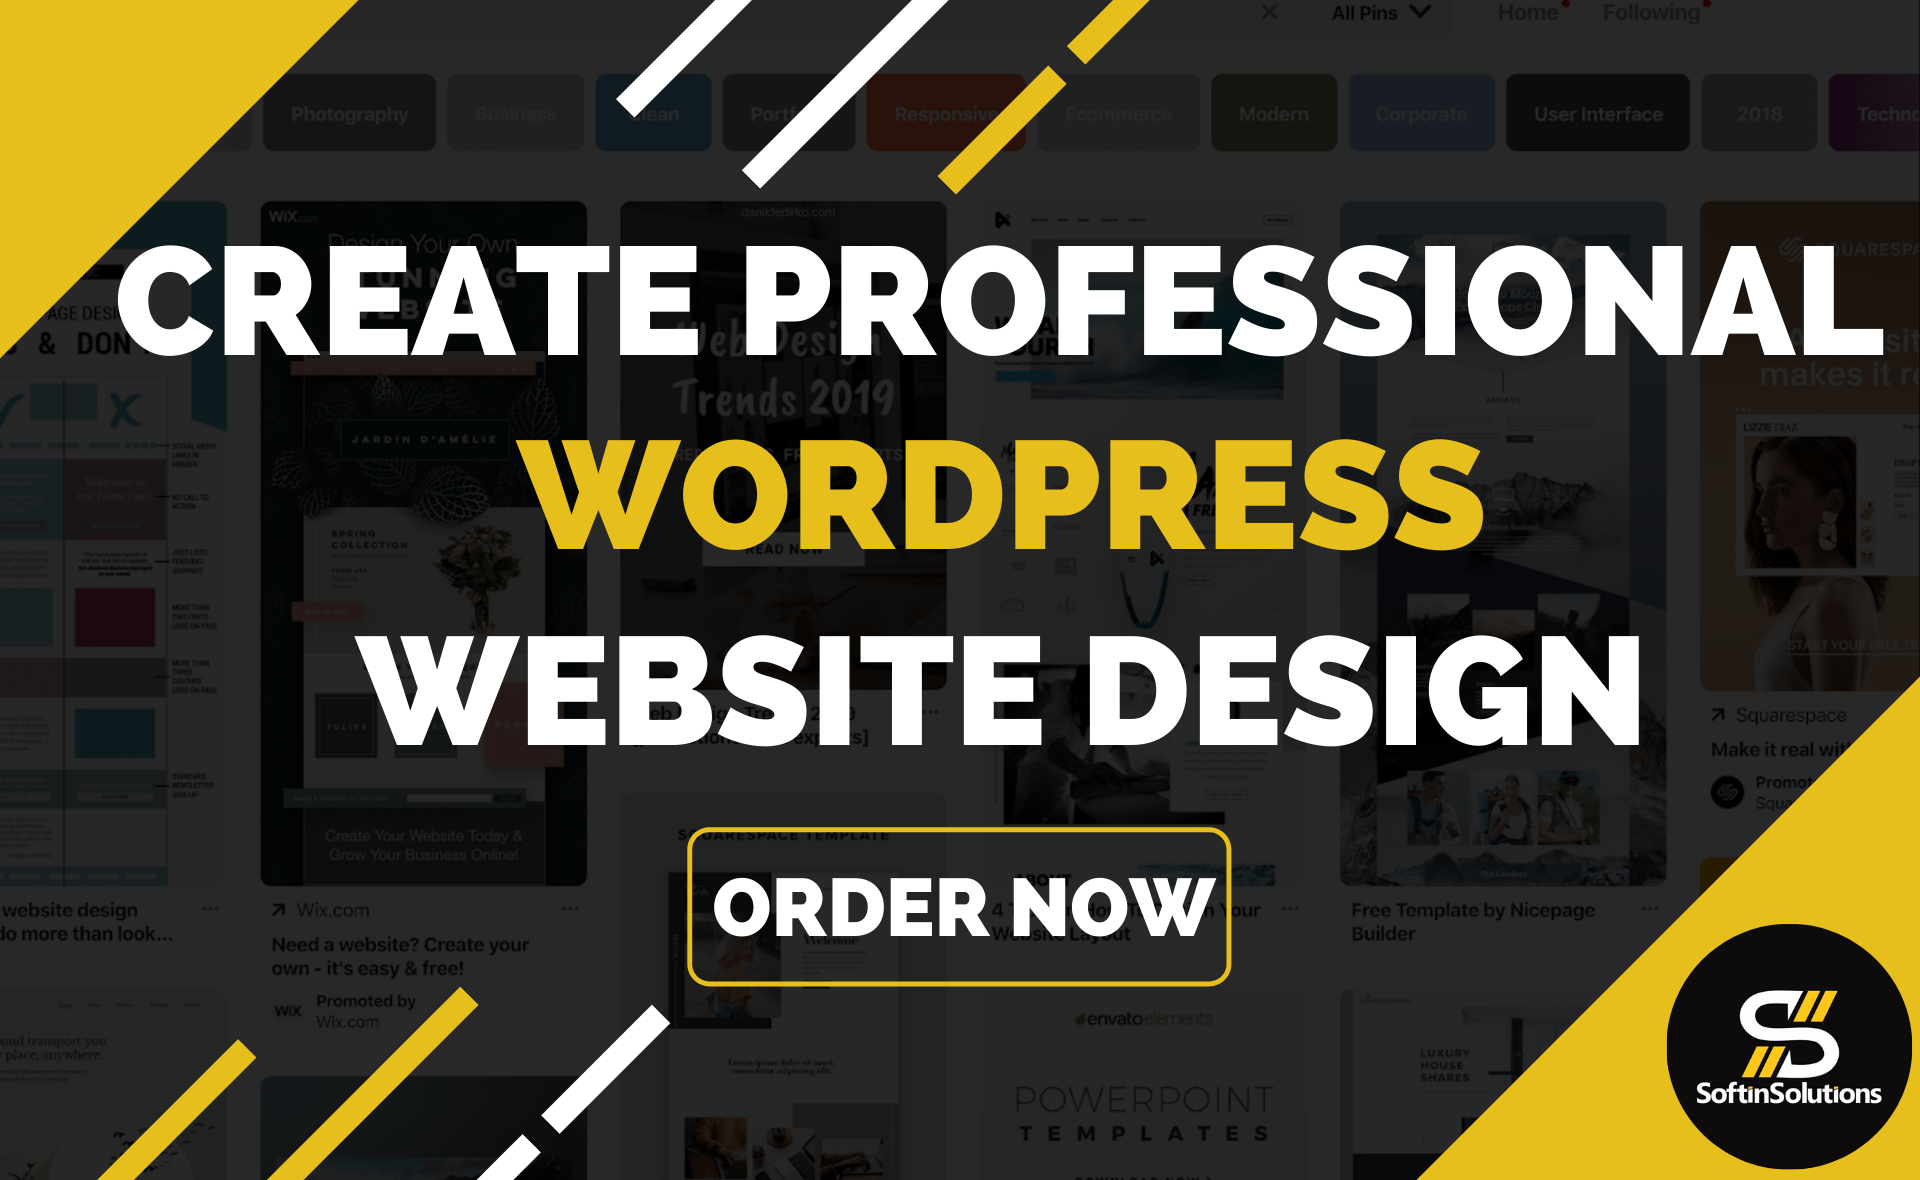 create professional wordpress website for ecommerce business or blog -  AnyTask.com